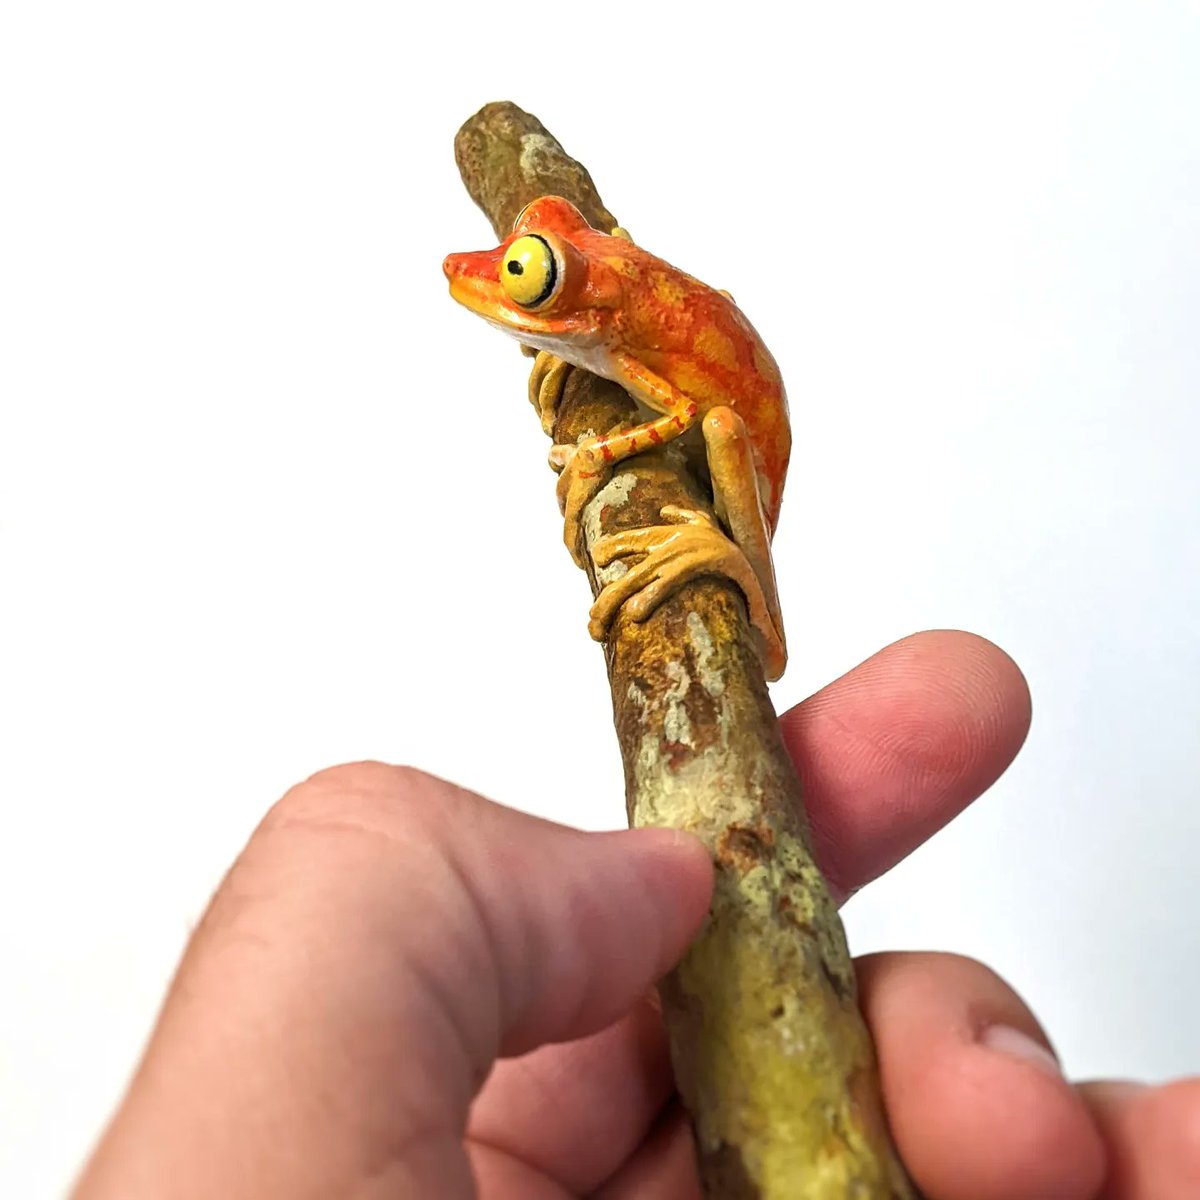 Welcome new followers! 
My name is Lincoln Savi and I make life sized, realistic, 3D-printed, animal models for research, education, and display. I also sell the files on my website Savimade.ca. (pictured: Boana picturata model)